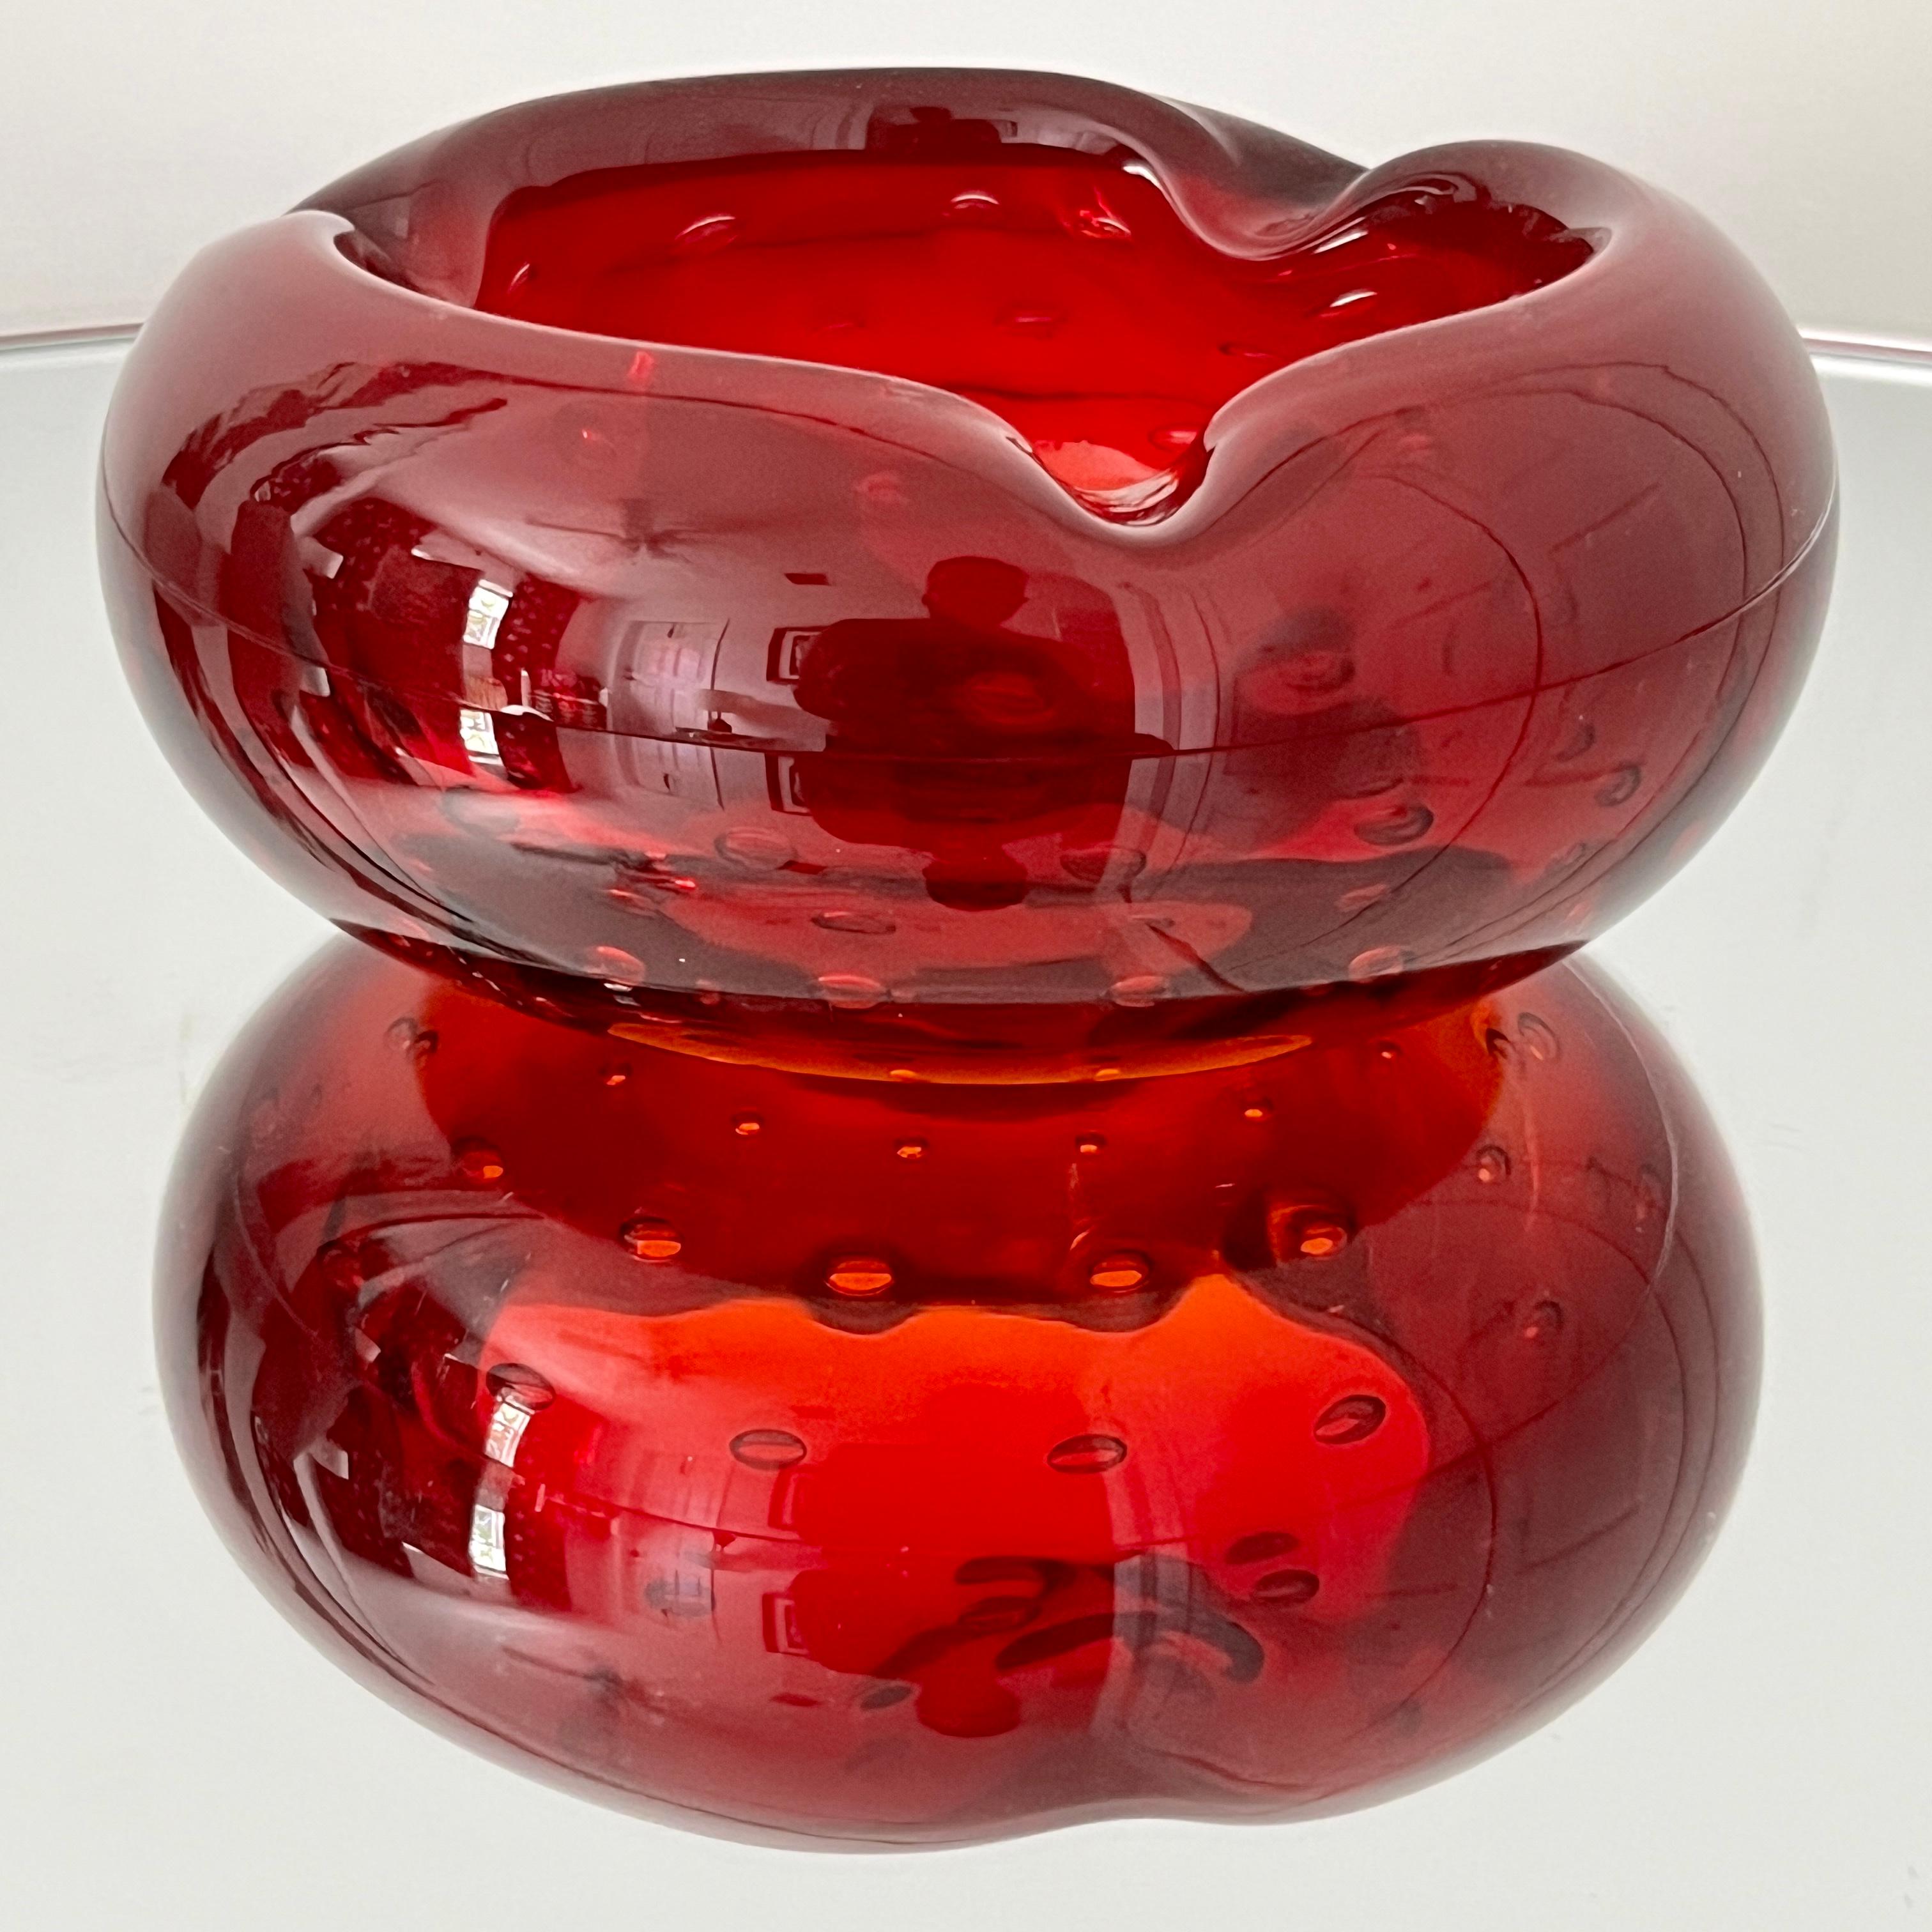 Mid-Century Modern Red Orange Murano Ashtray with Controlled Bubble Design by Seguso, circa 1950s For Sale